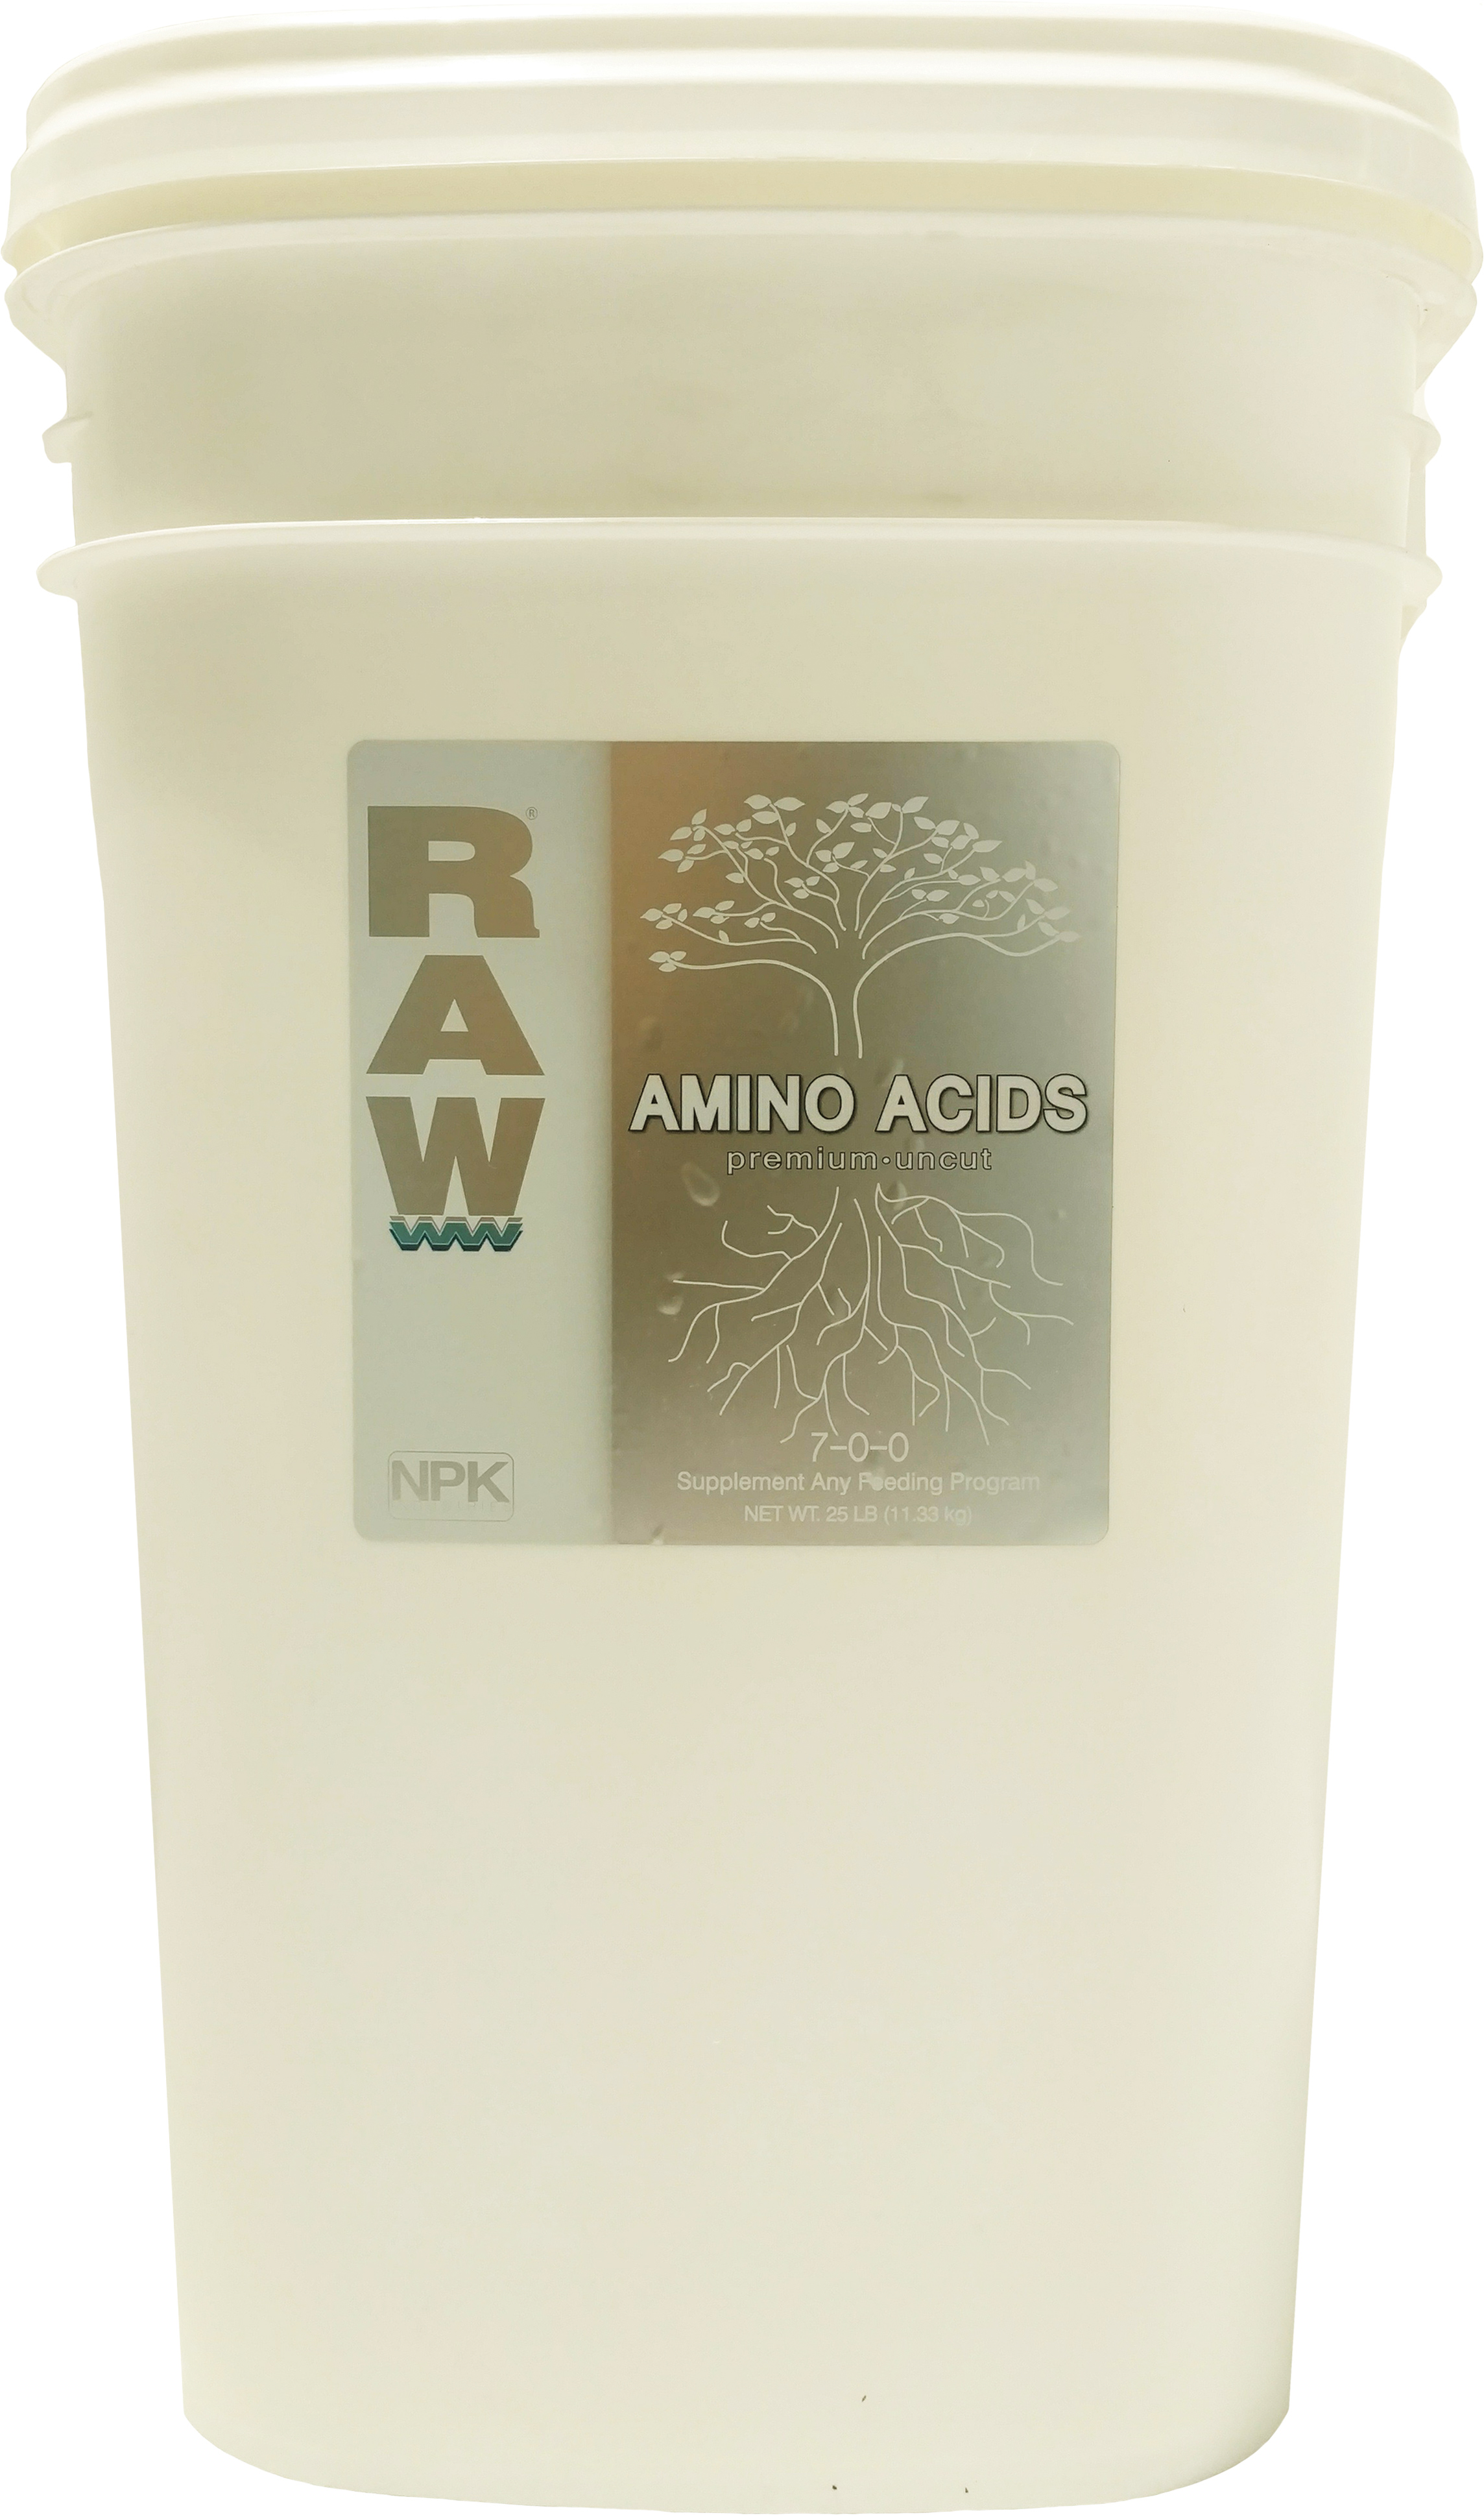 Picture for RAW Amino Acids, 25 lbs